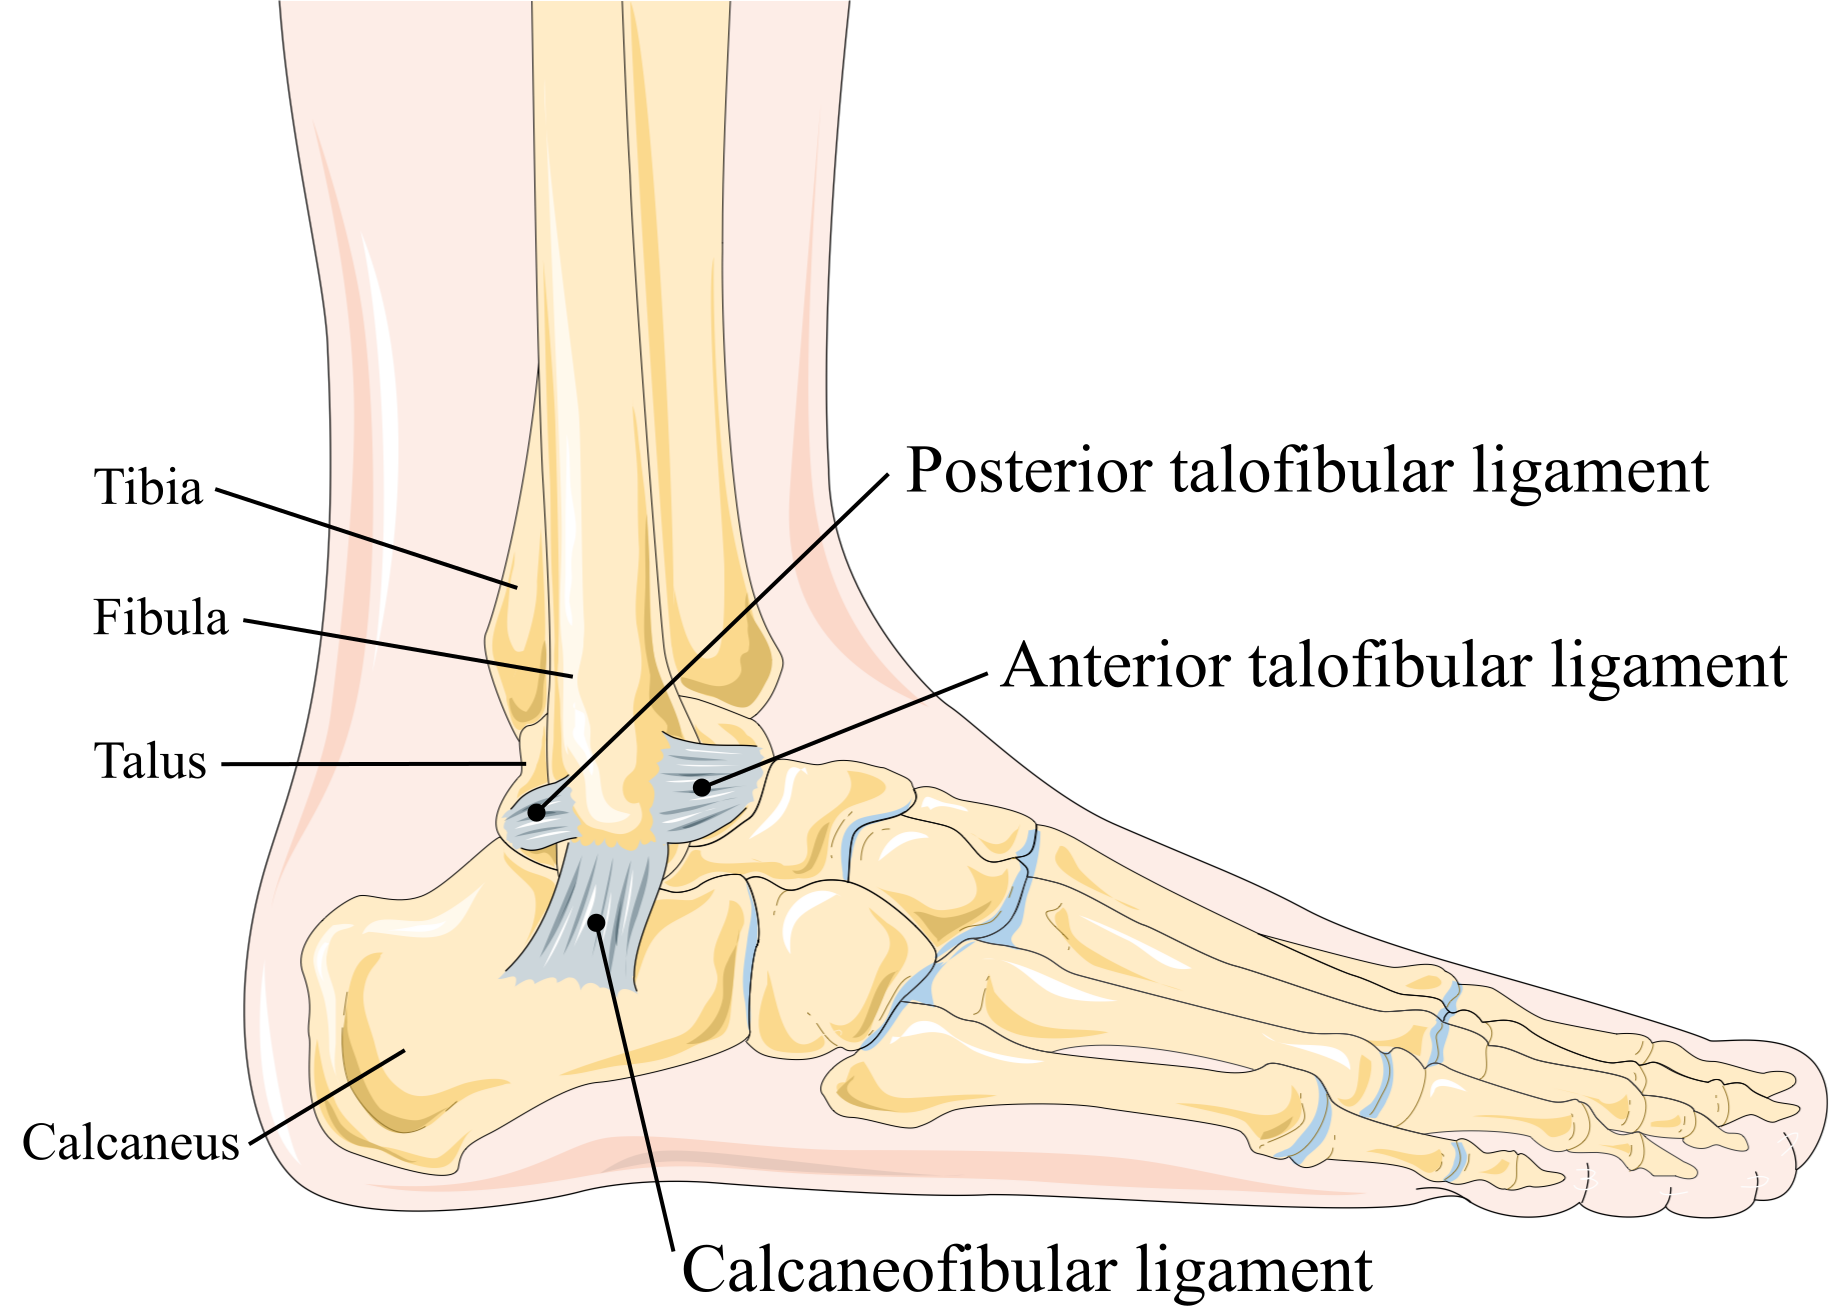 The anatomy of the ankle joint